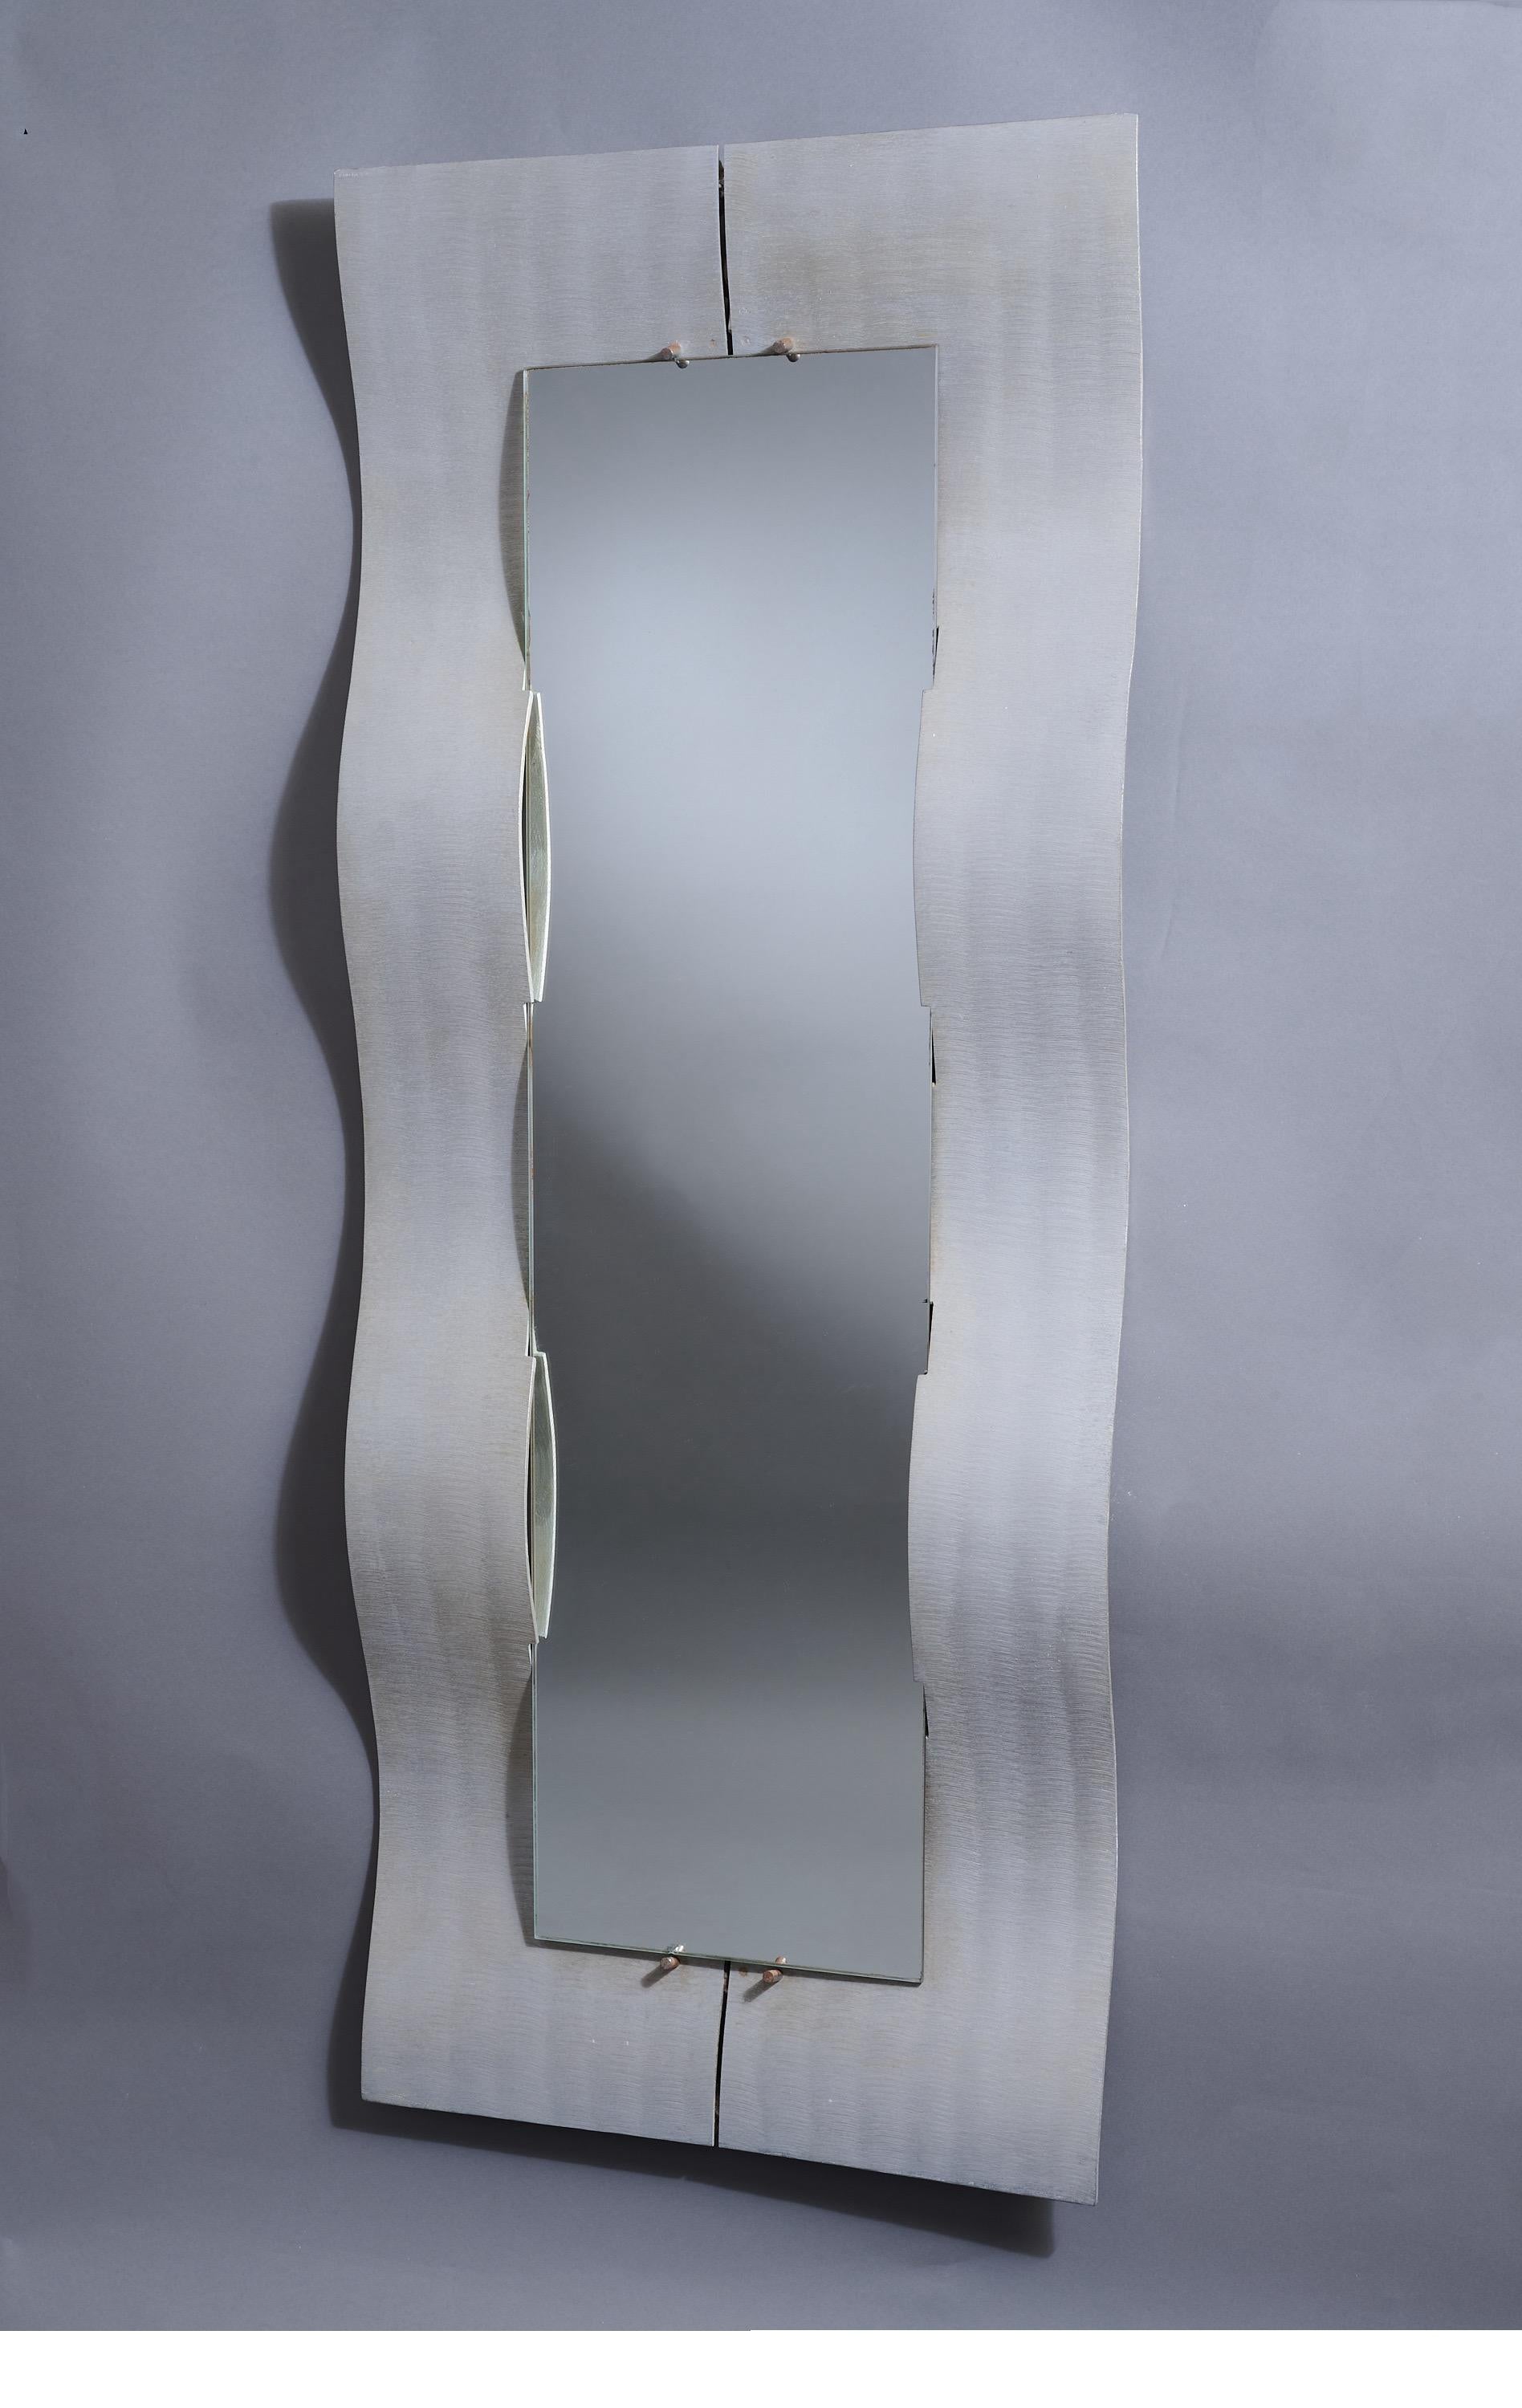 Lorenzo Burchiellaro (b. 1933)

An arresting full-length modernist wall mirror by Italian sculptor Lorenzo Burchiellaro, in etched and formed aluminum. A long, three-dimensional rectangular frame composed of two dynamic ribbons, beautifully curved